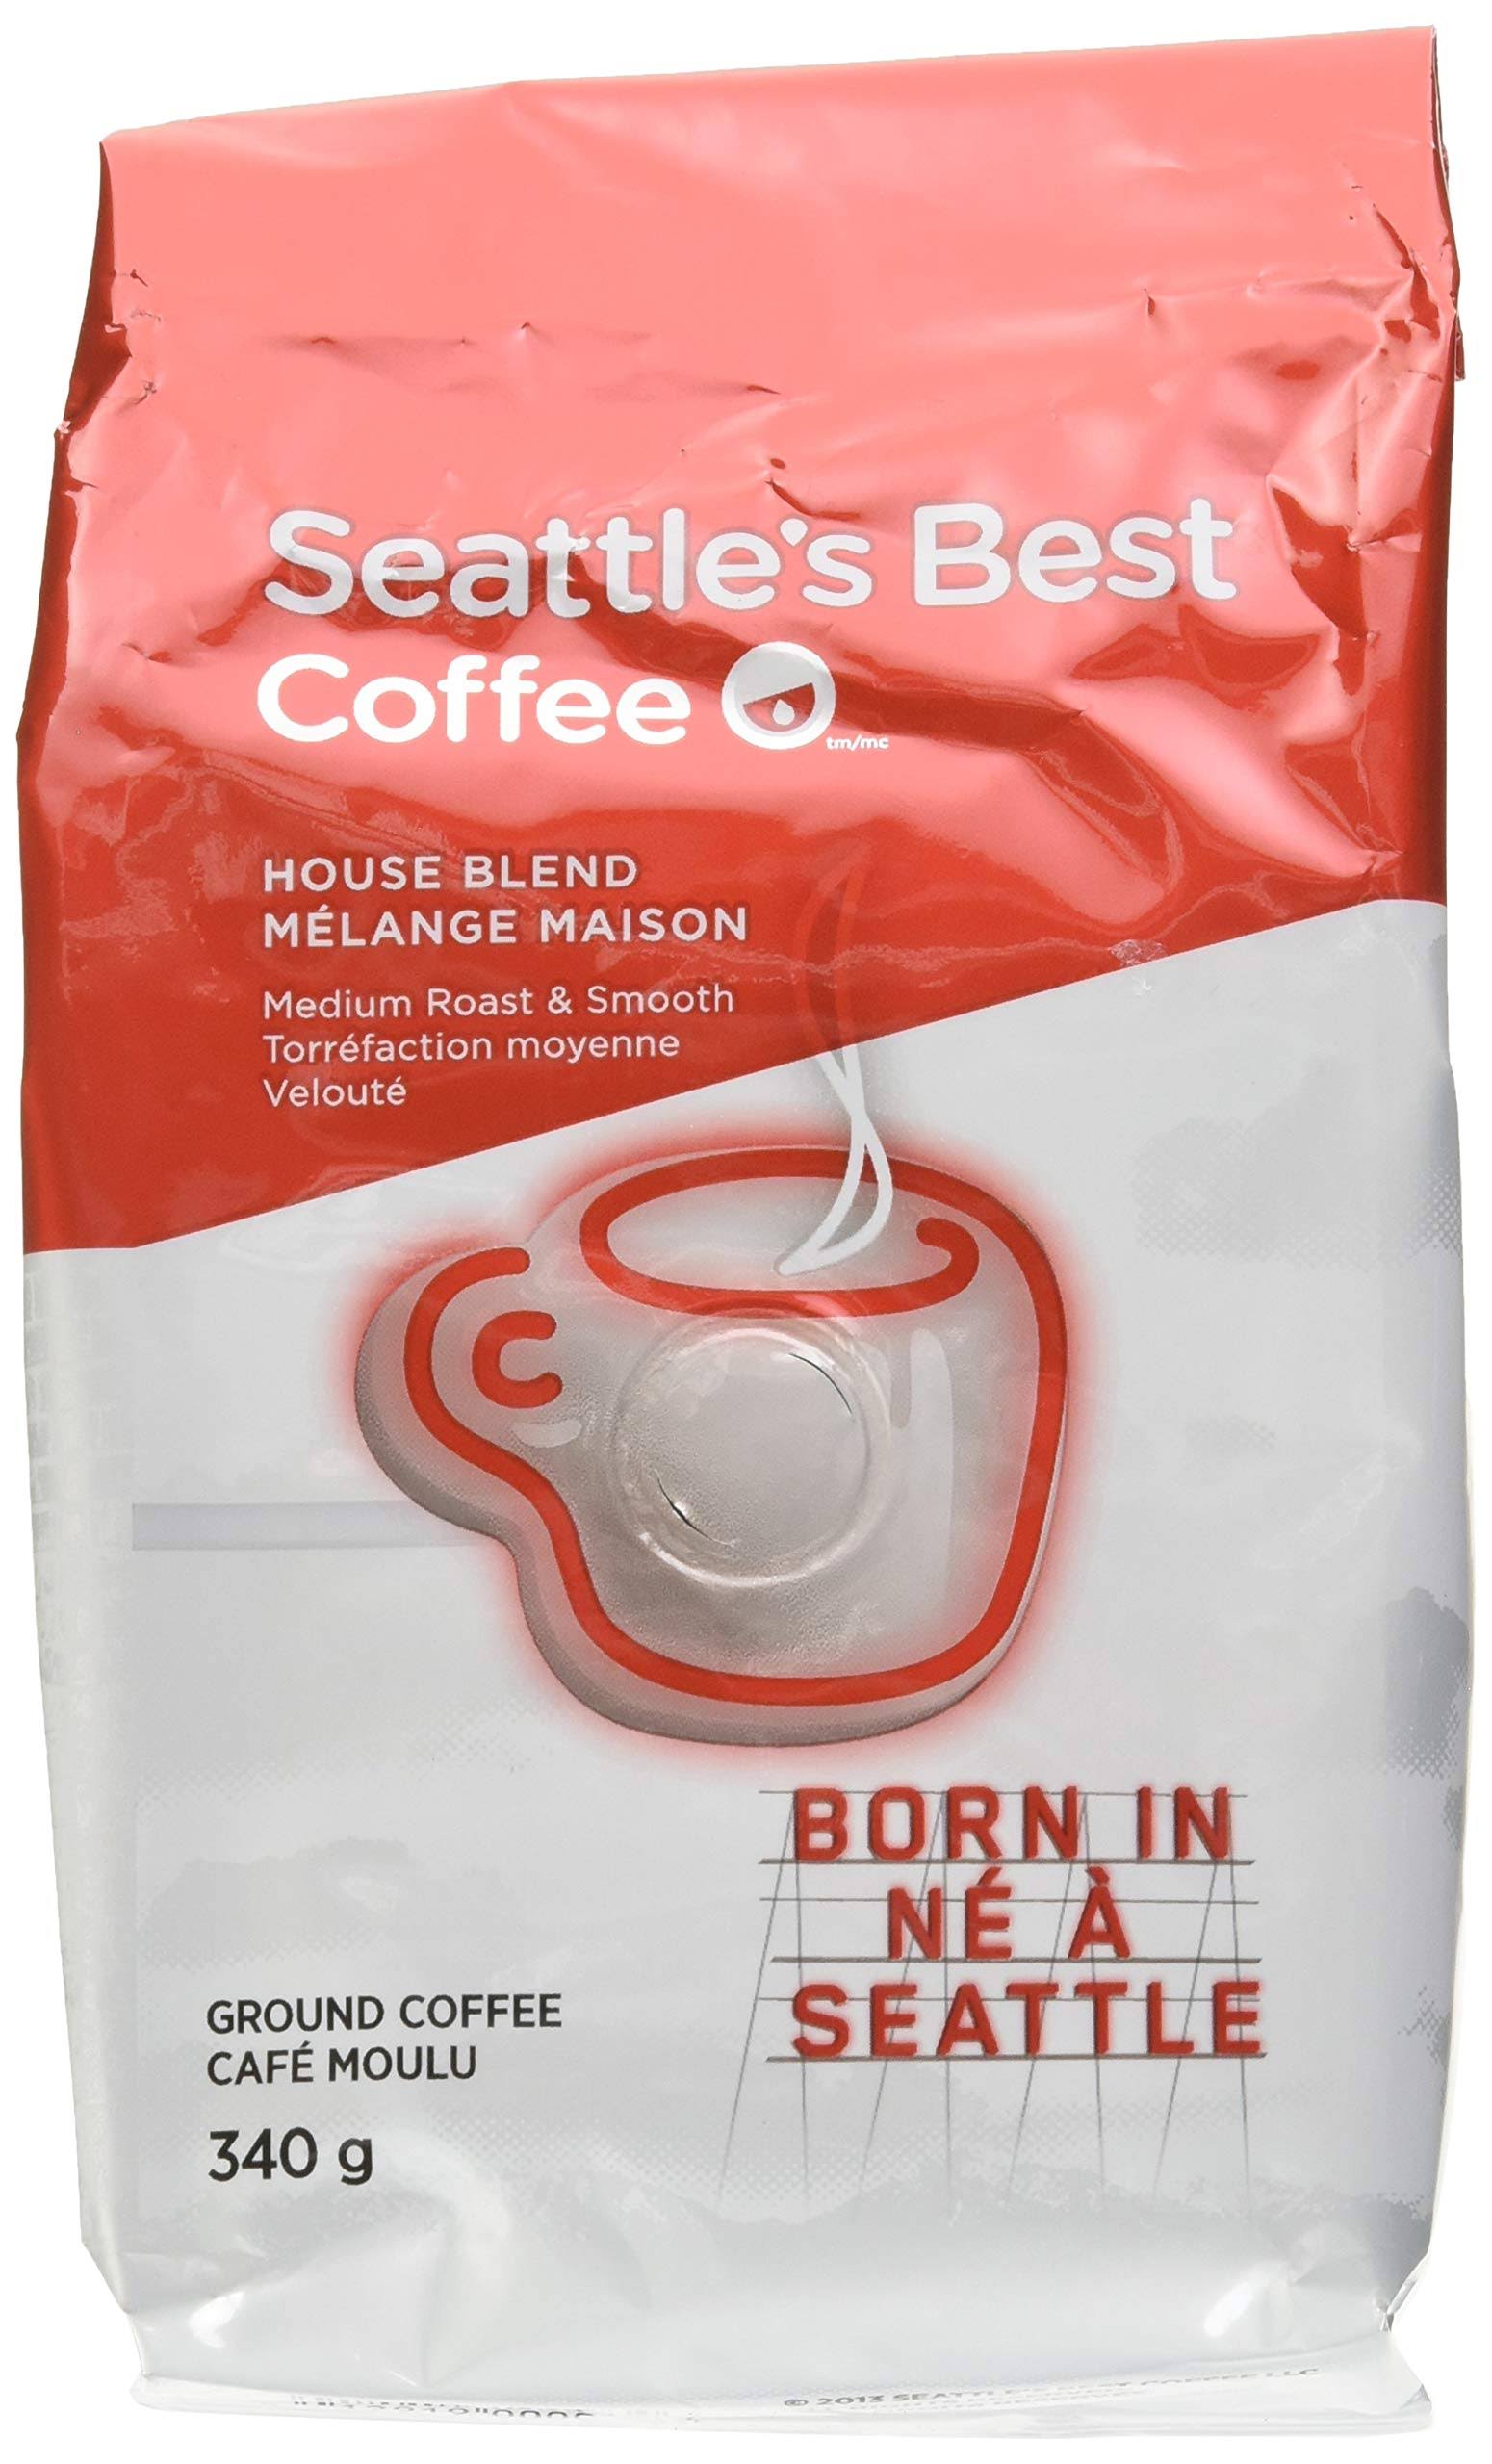 Seattle's Best Coffee House Blend Ground Coffee, 340g